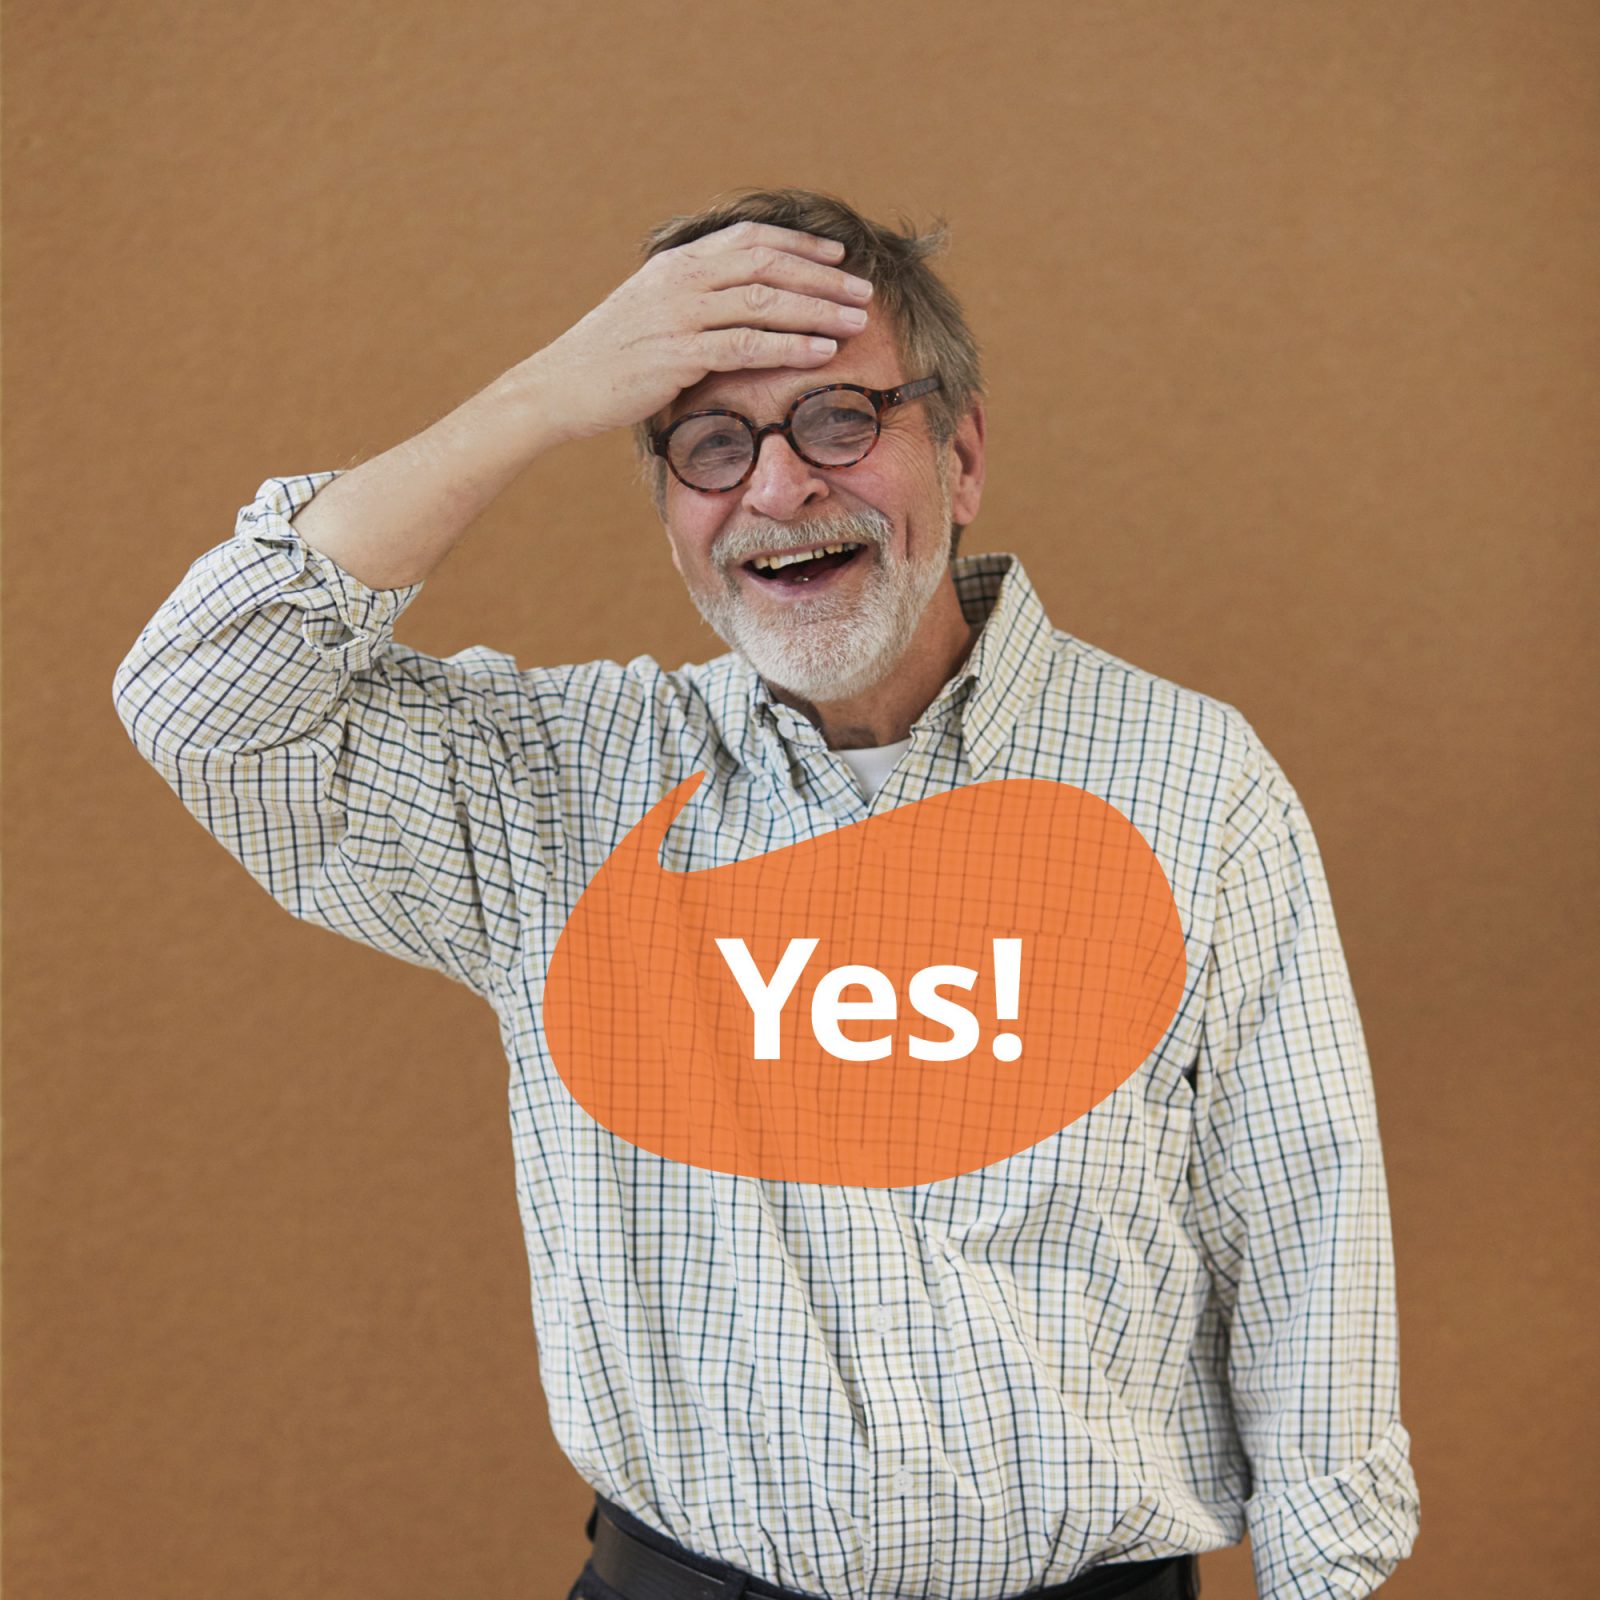 Grey-haired man in check shirt smiles and puts his hand to his forehead. A speech bubble contains the text 'Yes'.